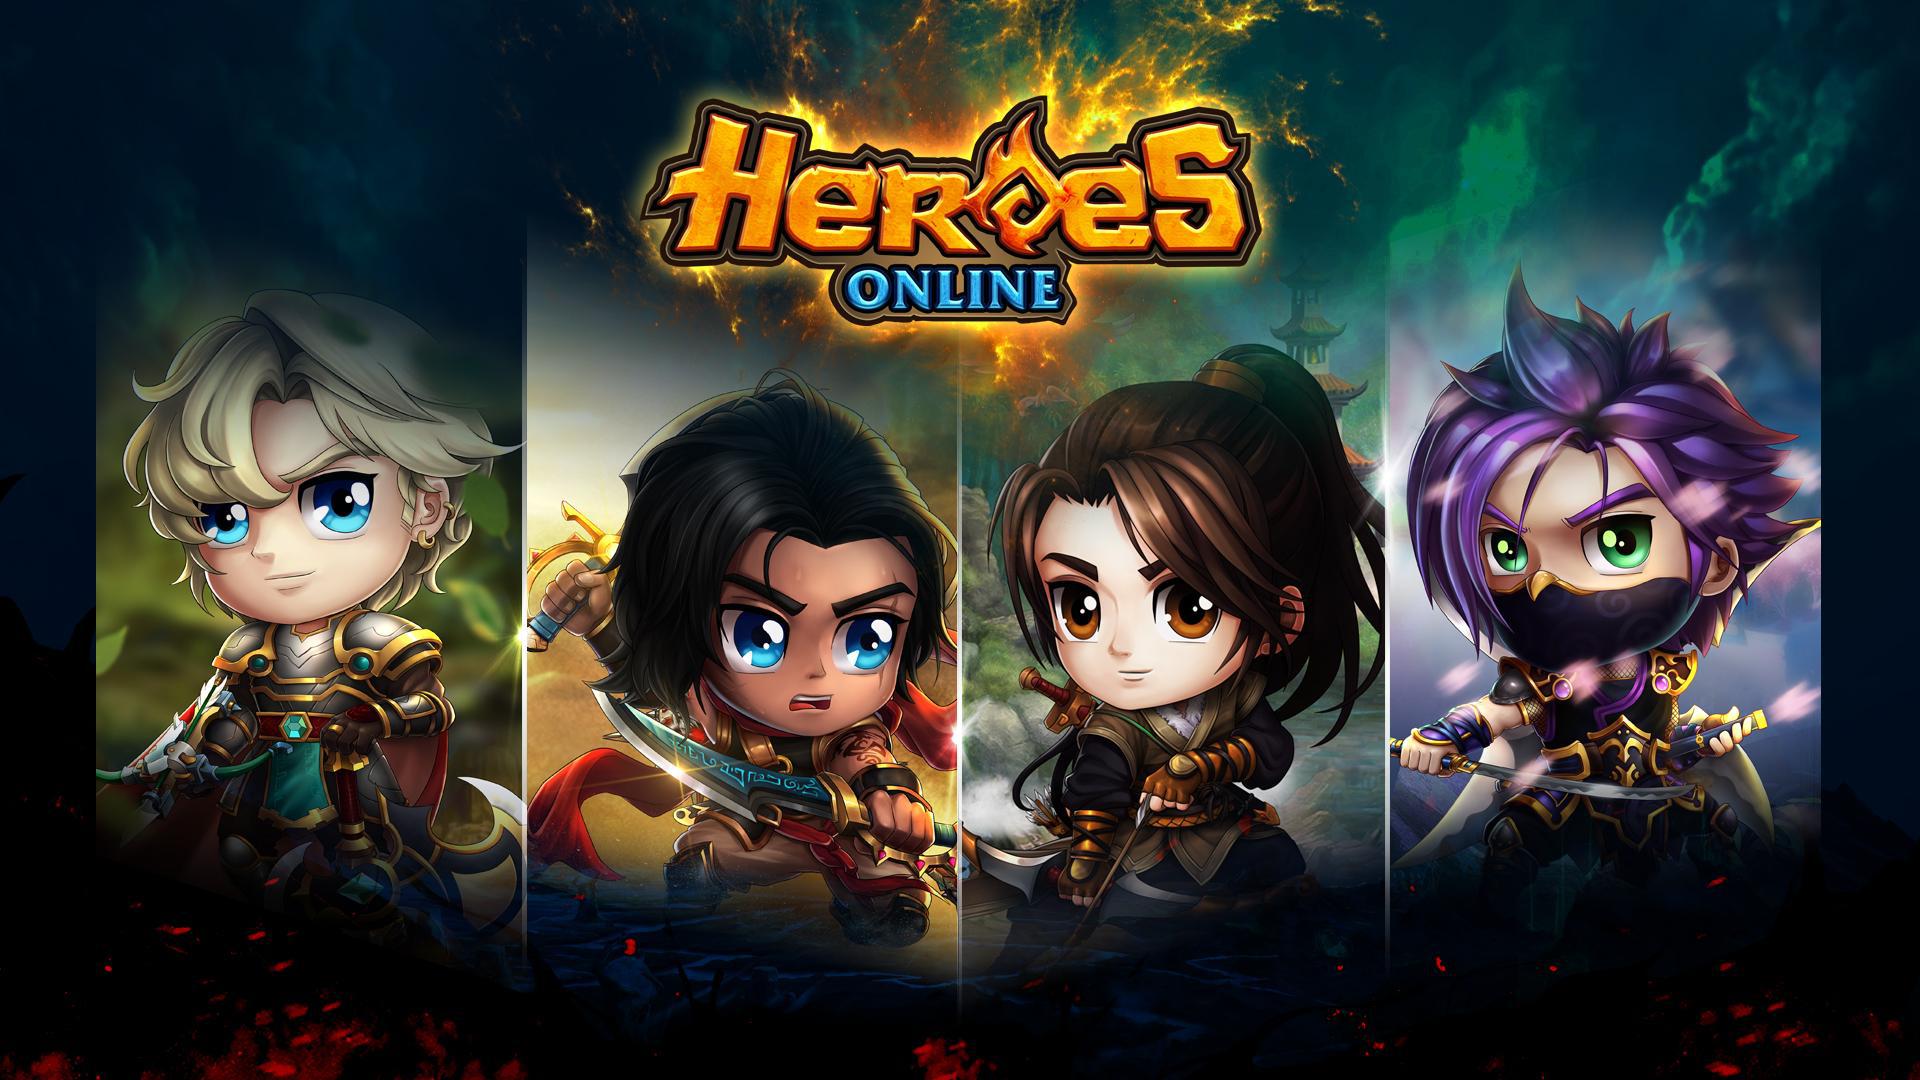 HEROES ONLINE - The First Dragonslayers